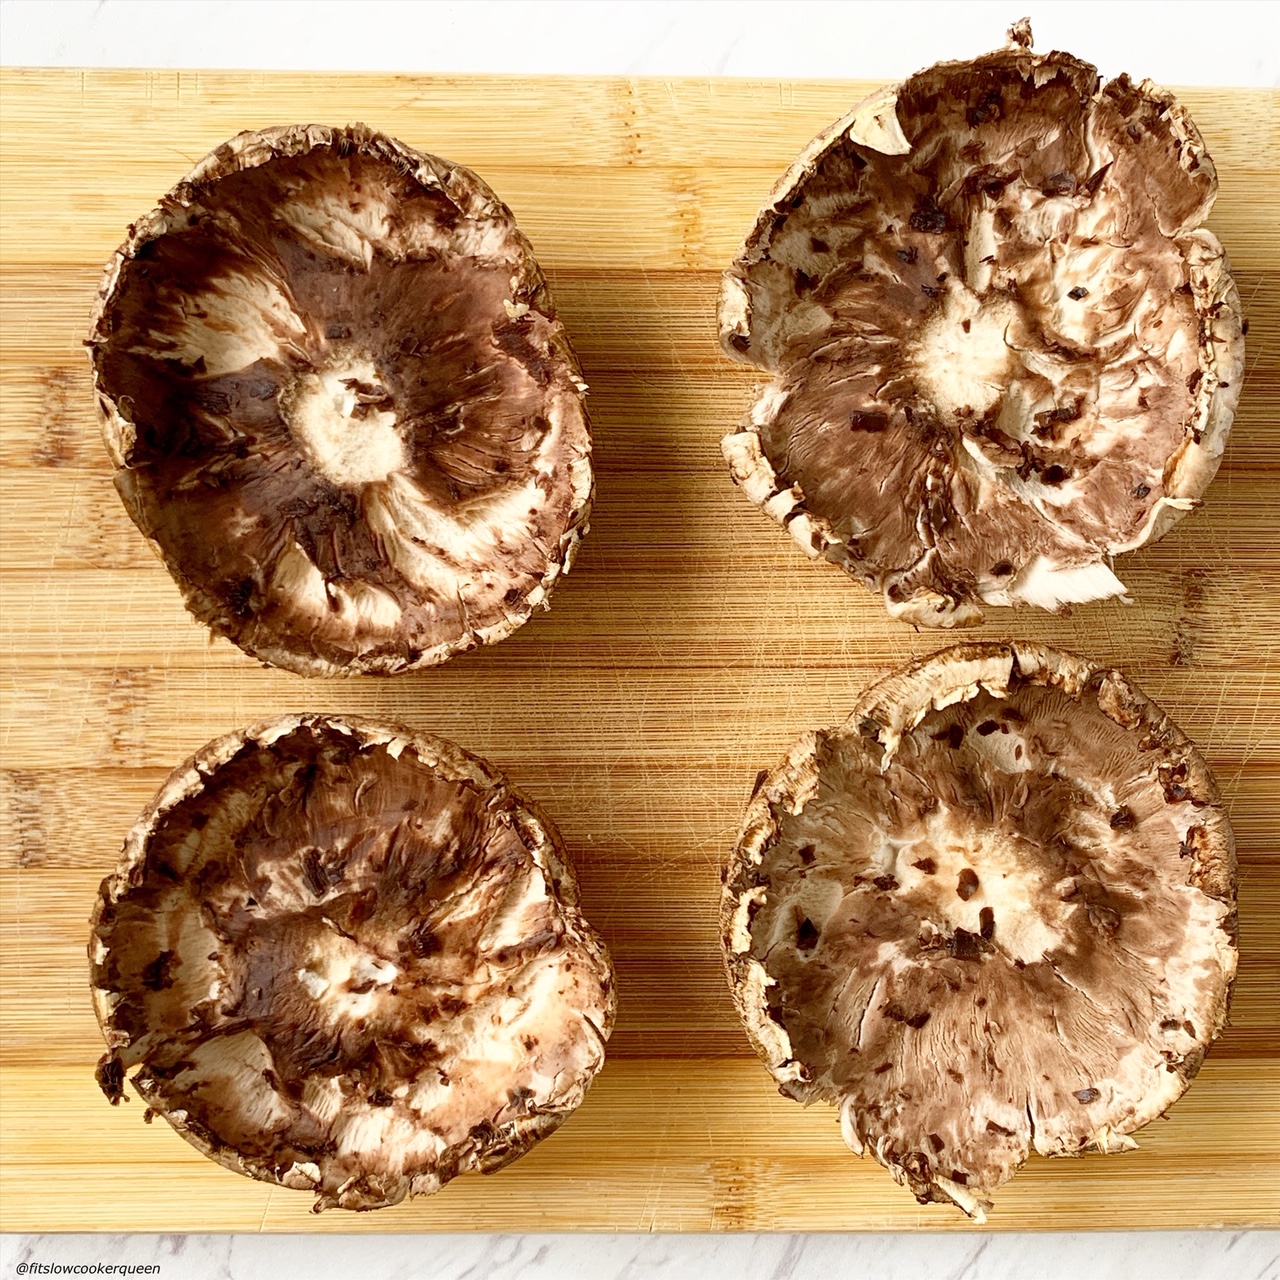 4 large portobello mushrooms cleaned with gills removed on a cutting board